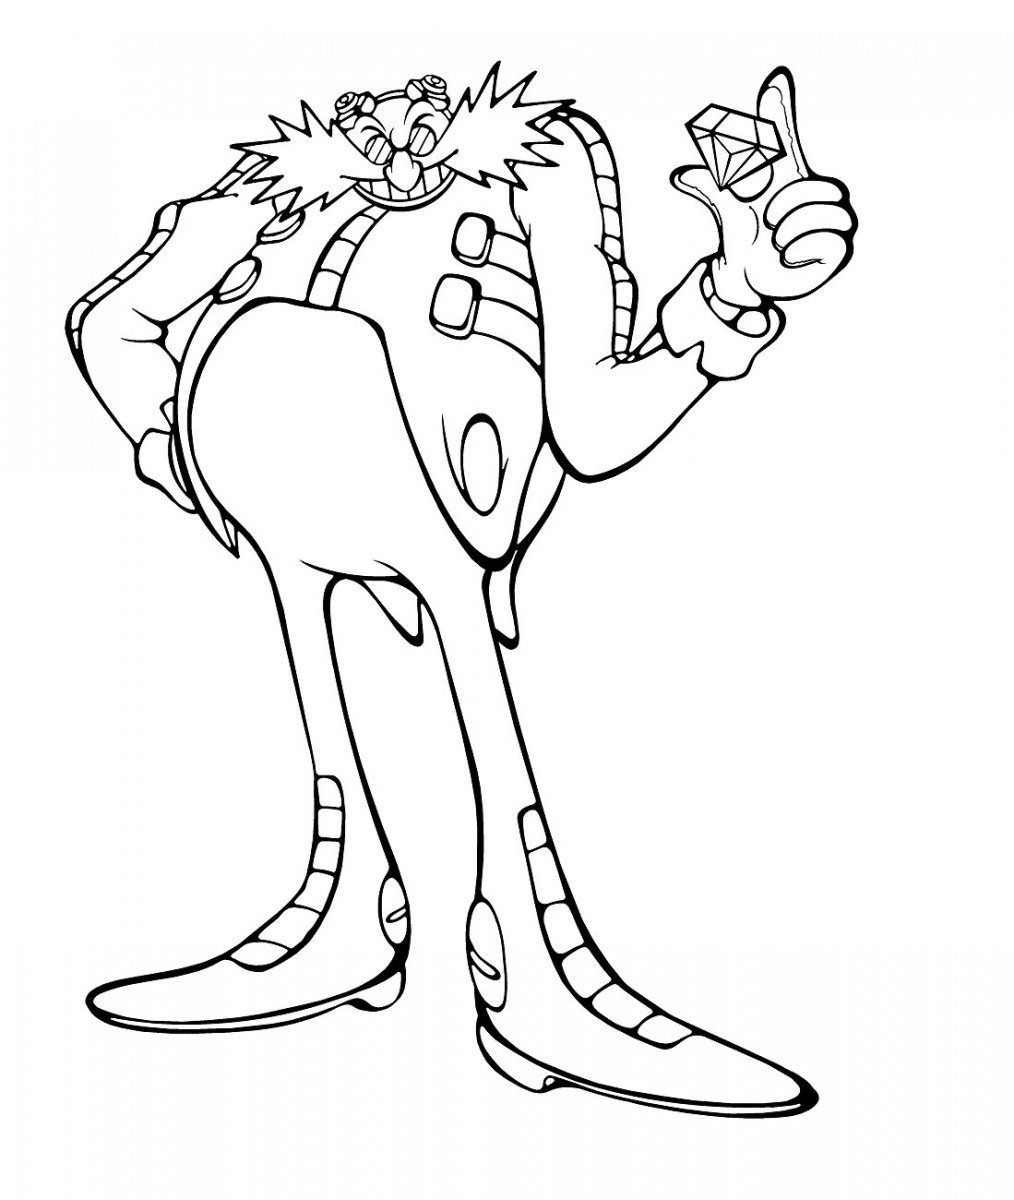 Doctor Eggman With Diamonds Coloring Page